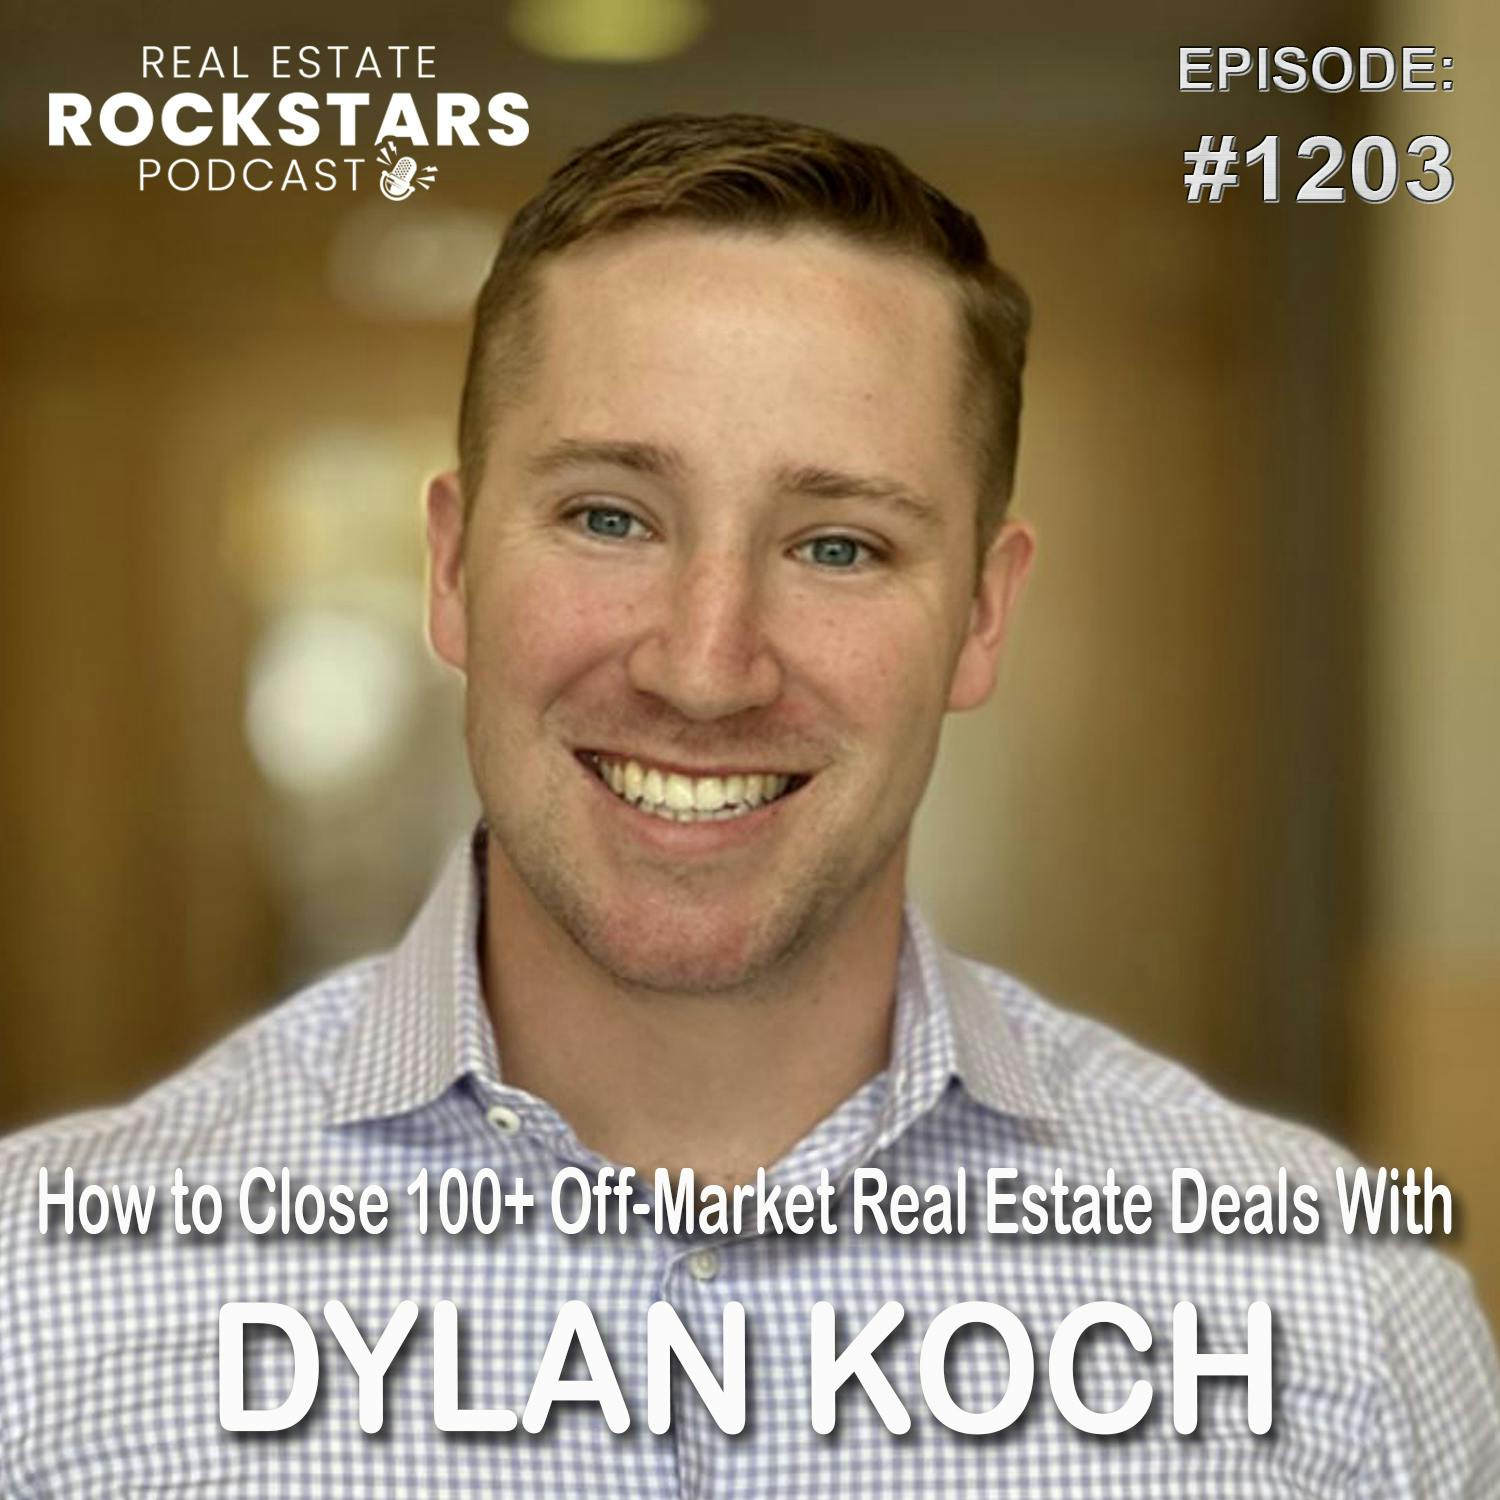 1203: How to Close 100+ Off-Market Real Estate Deals With Dylan Koch